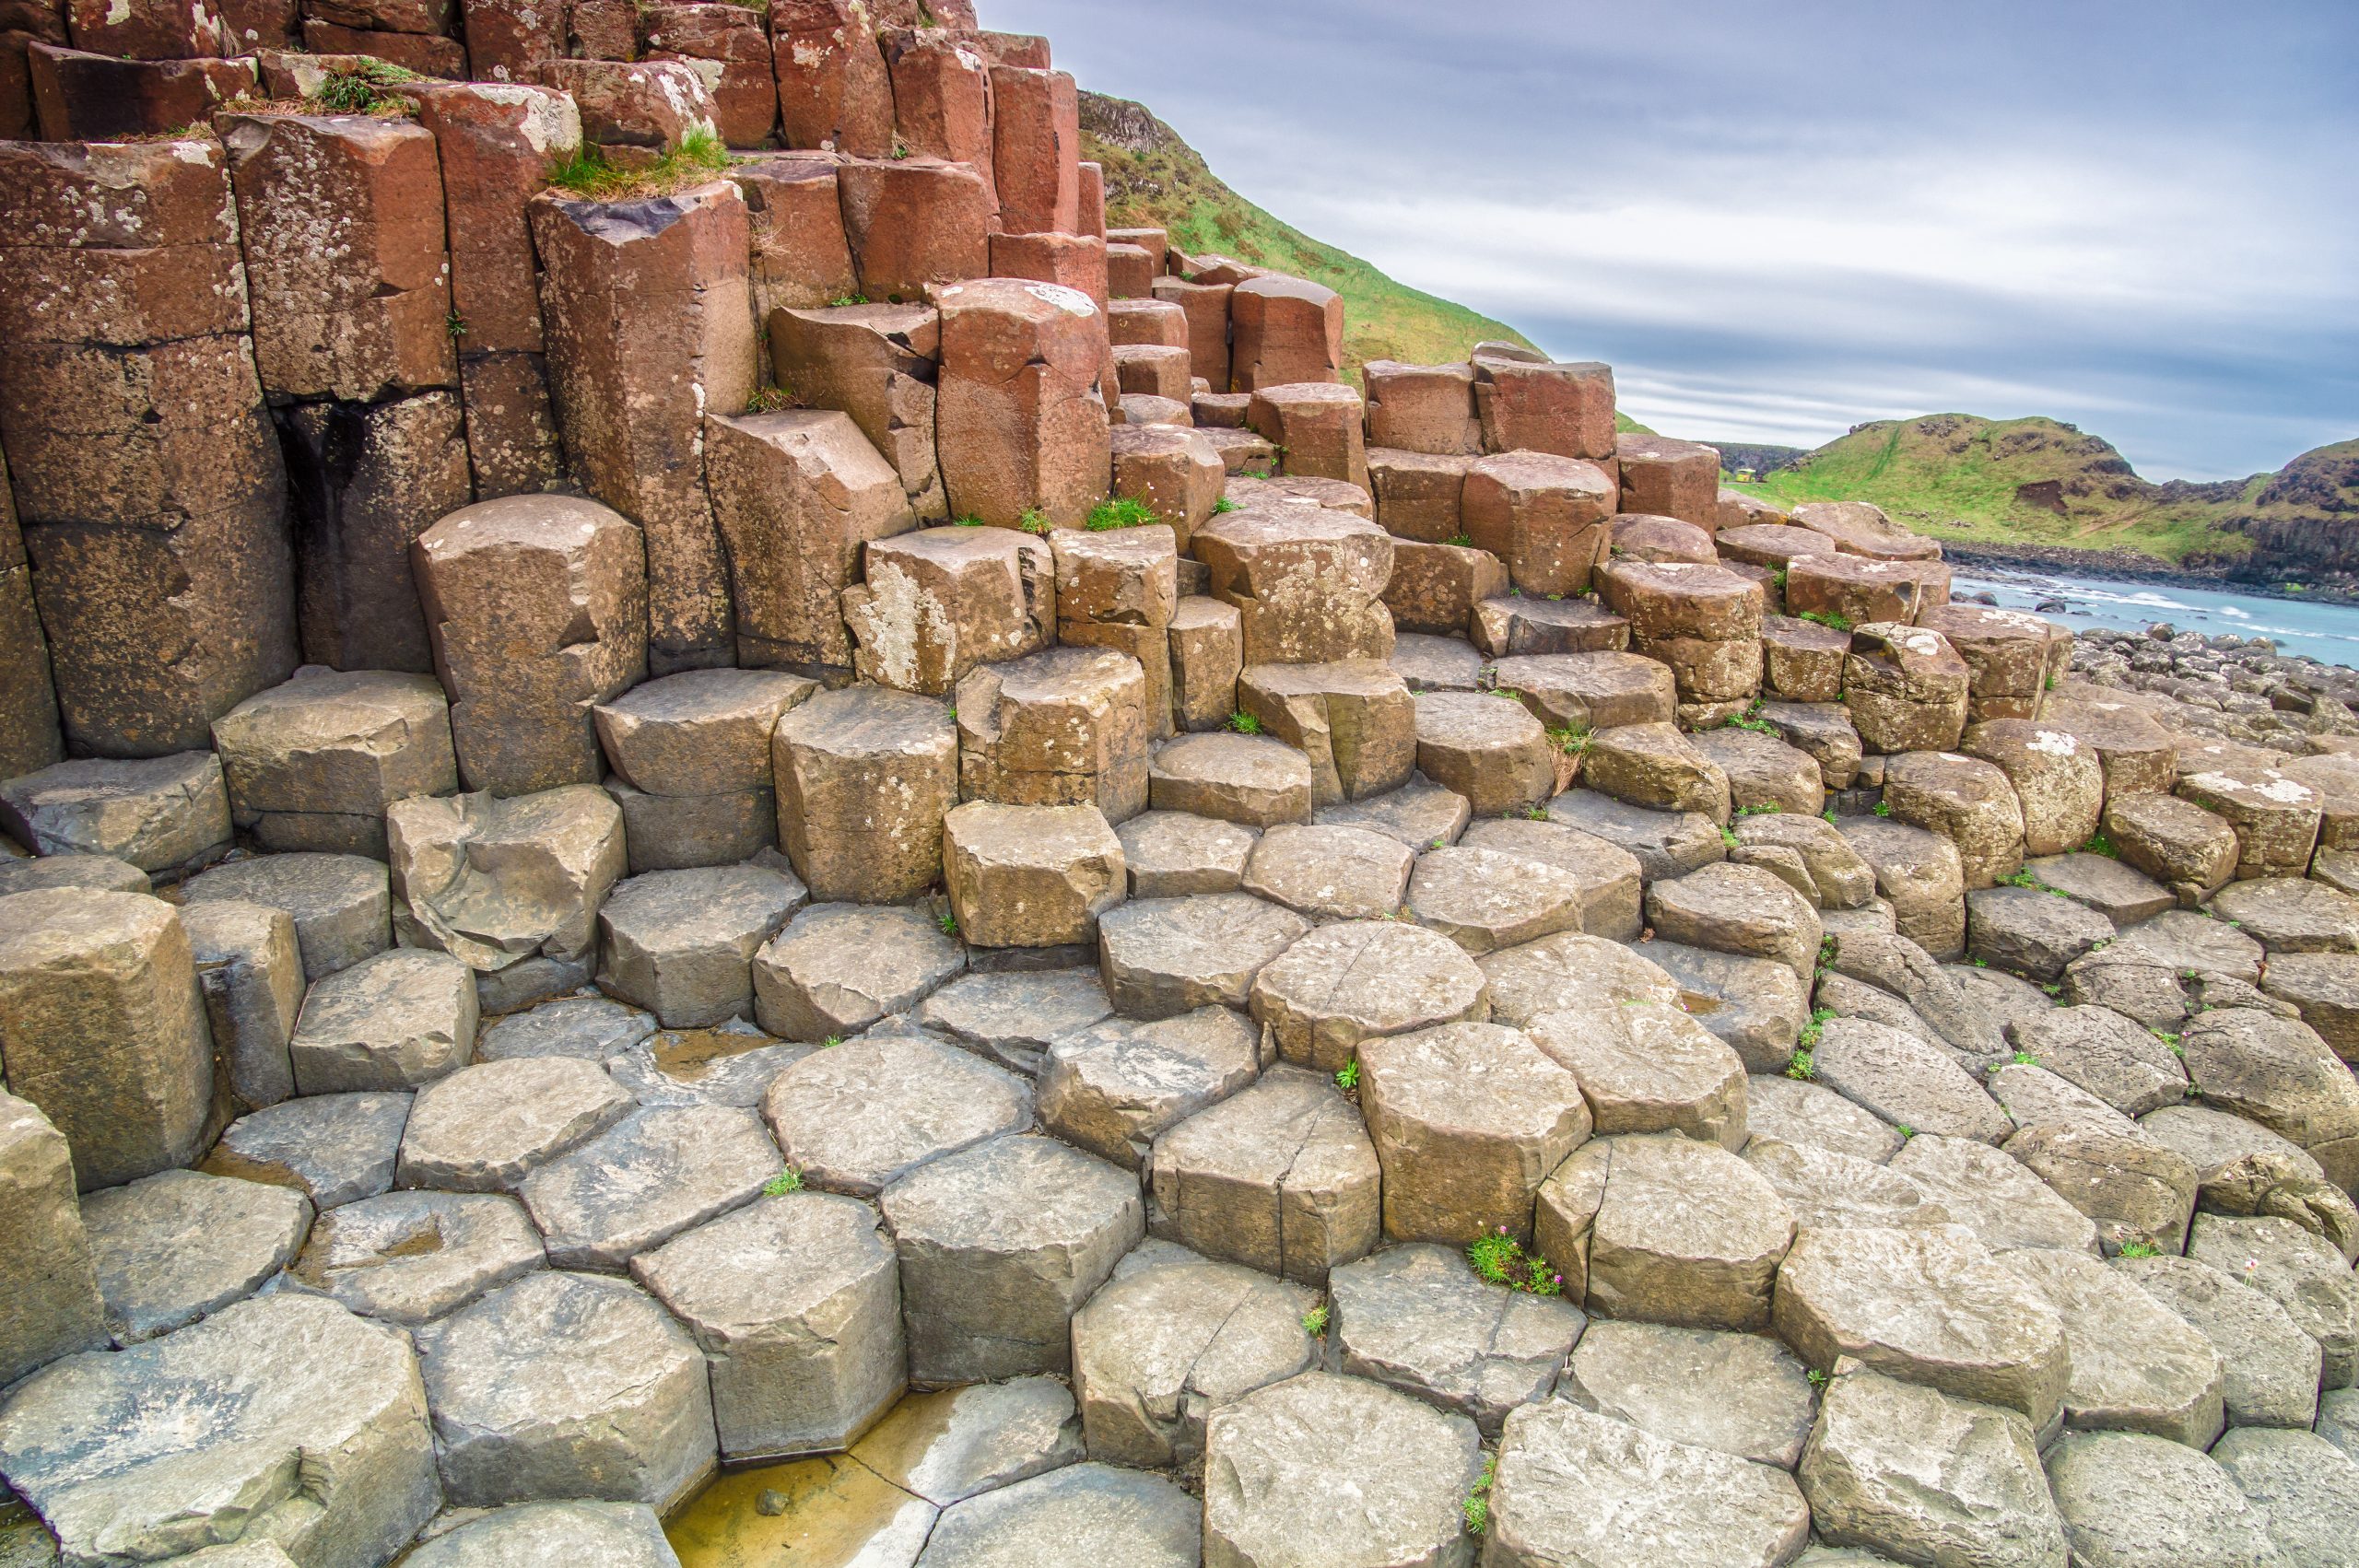 Columnar jointing on Giant's Causeway in Ireland.